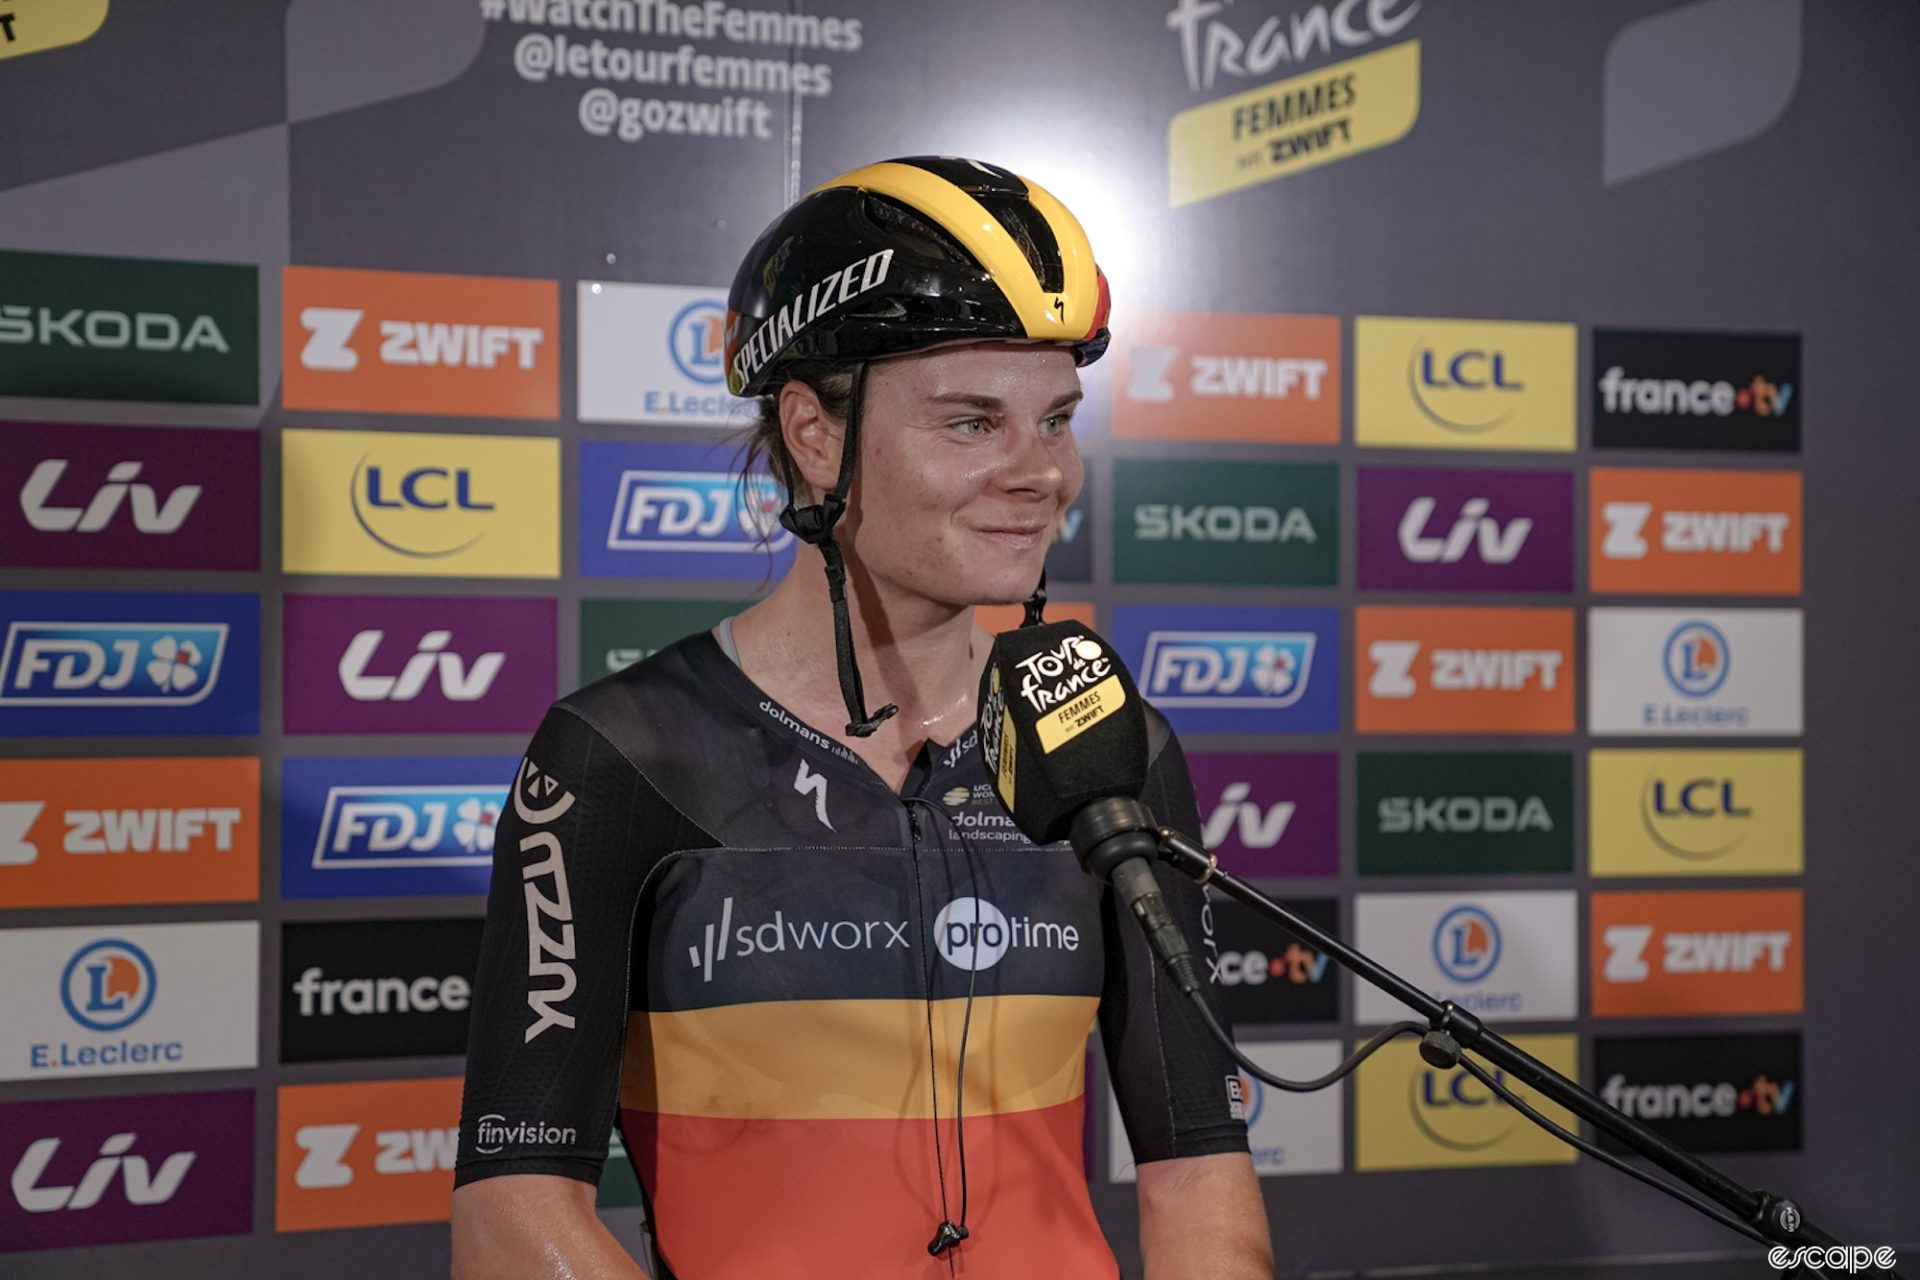 Lotte Kopecky smirks during the Tour de France Femmes stage 1 post-stage interview.